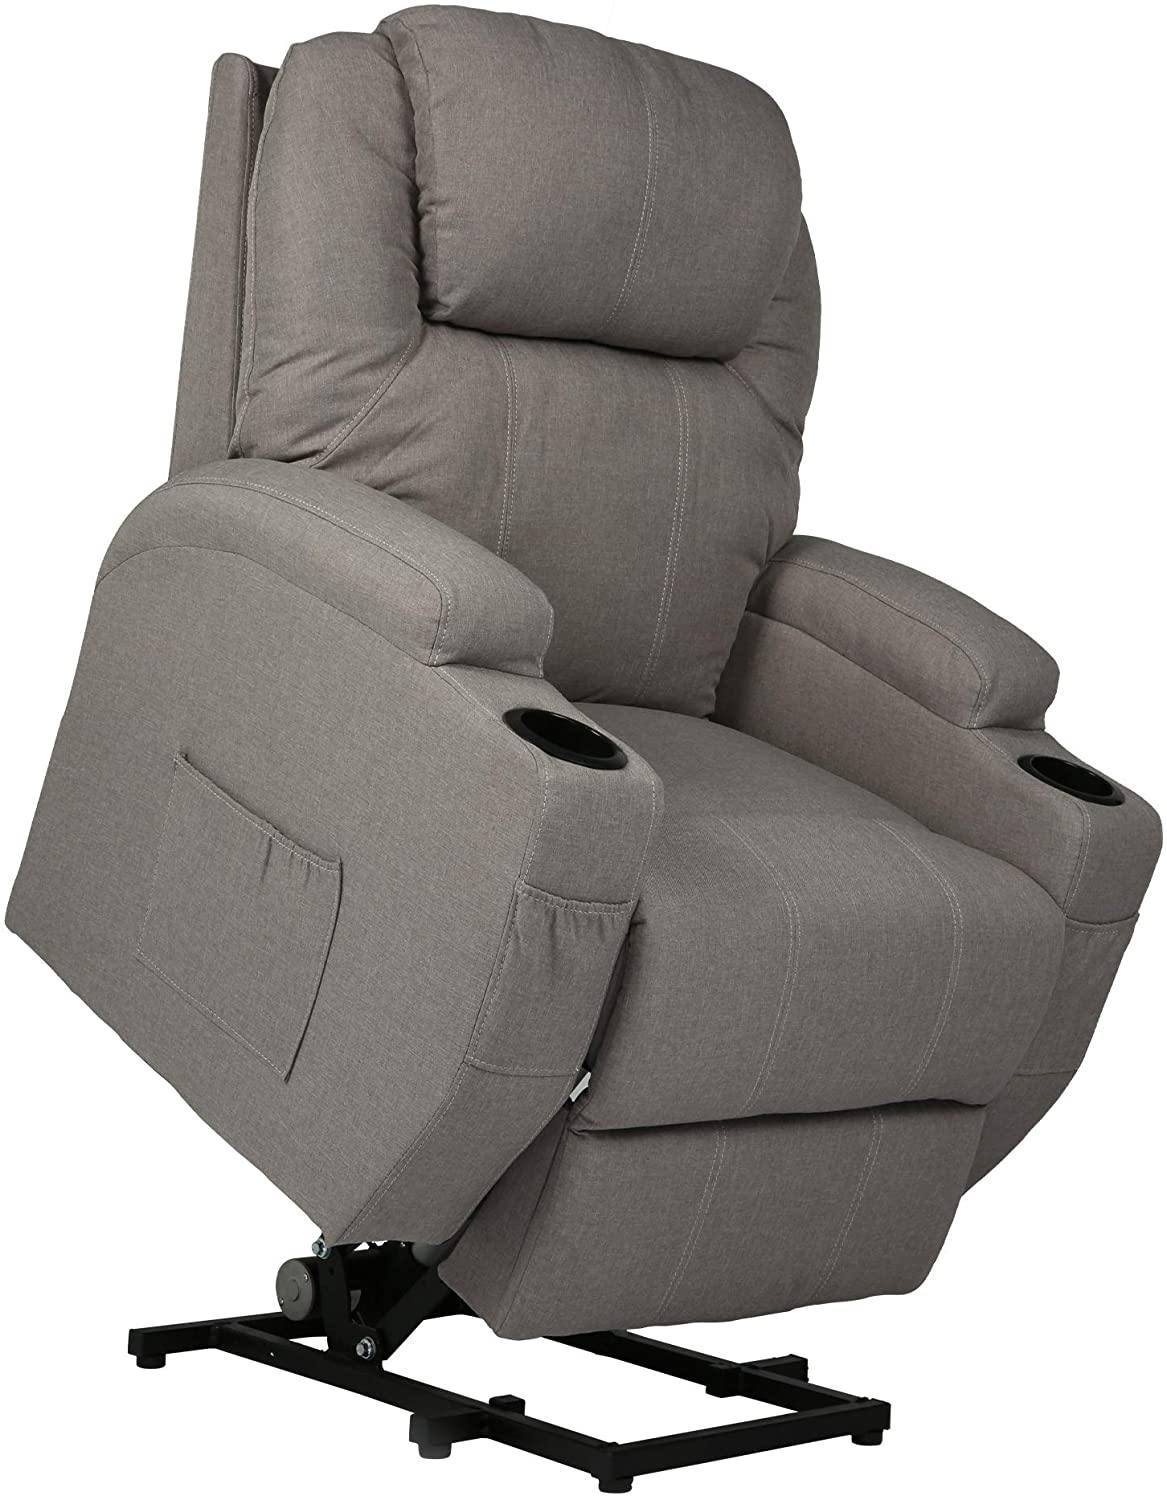 Single Recliner Chair with Massage & Heating Ergonomic Lounge Massage Sofa Power Lift with 2 Cup Holder Home Theater Seat, Fabric, Grey - Bosonshop